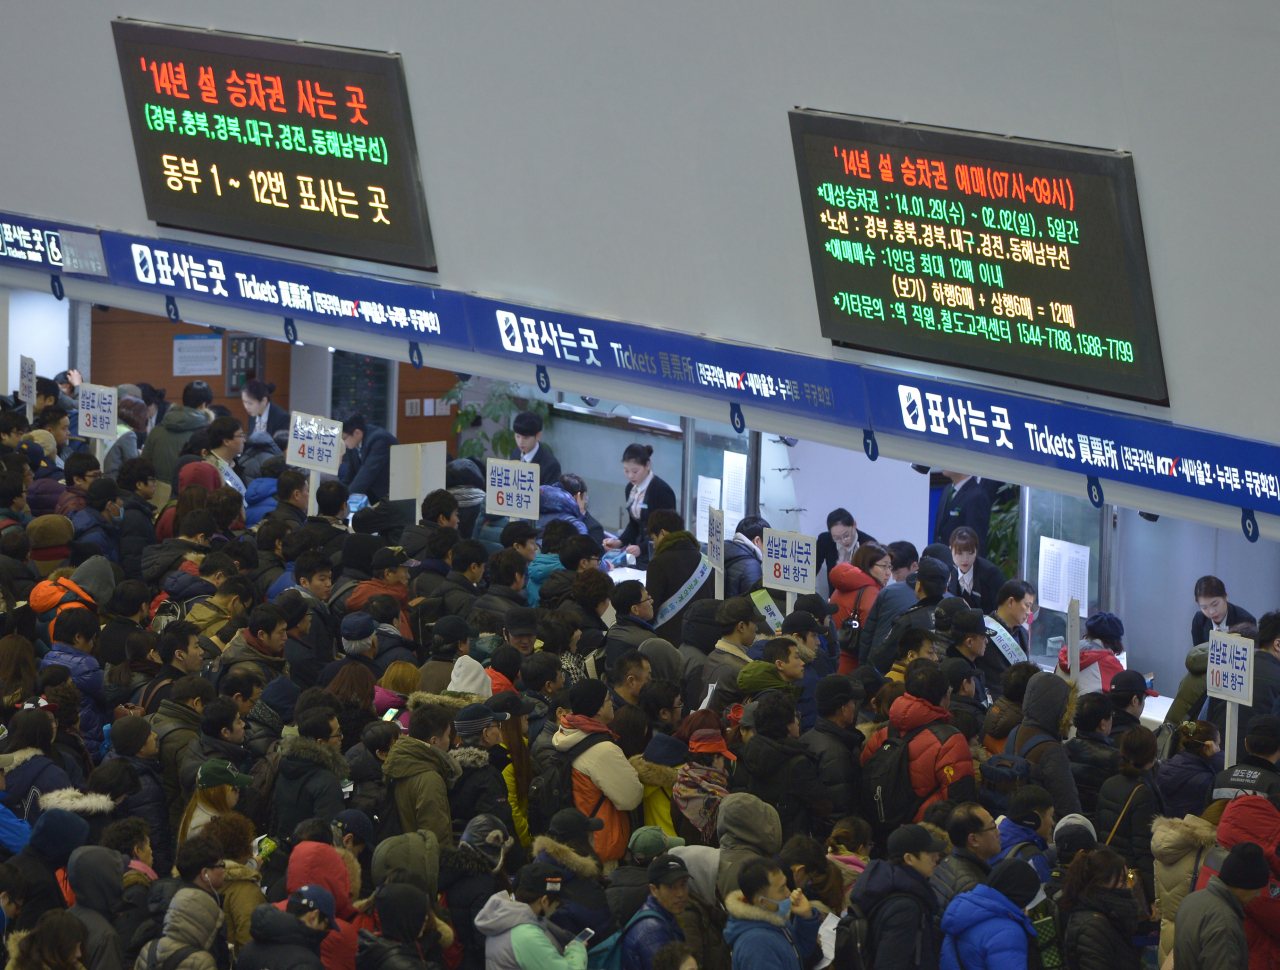 Ticket boxes are crowded with citizens seeking Seollal train tickets in Seoul Station on Jan. 8 in 2014. (Herald DB)